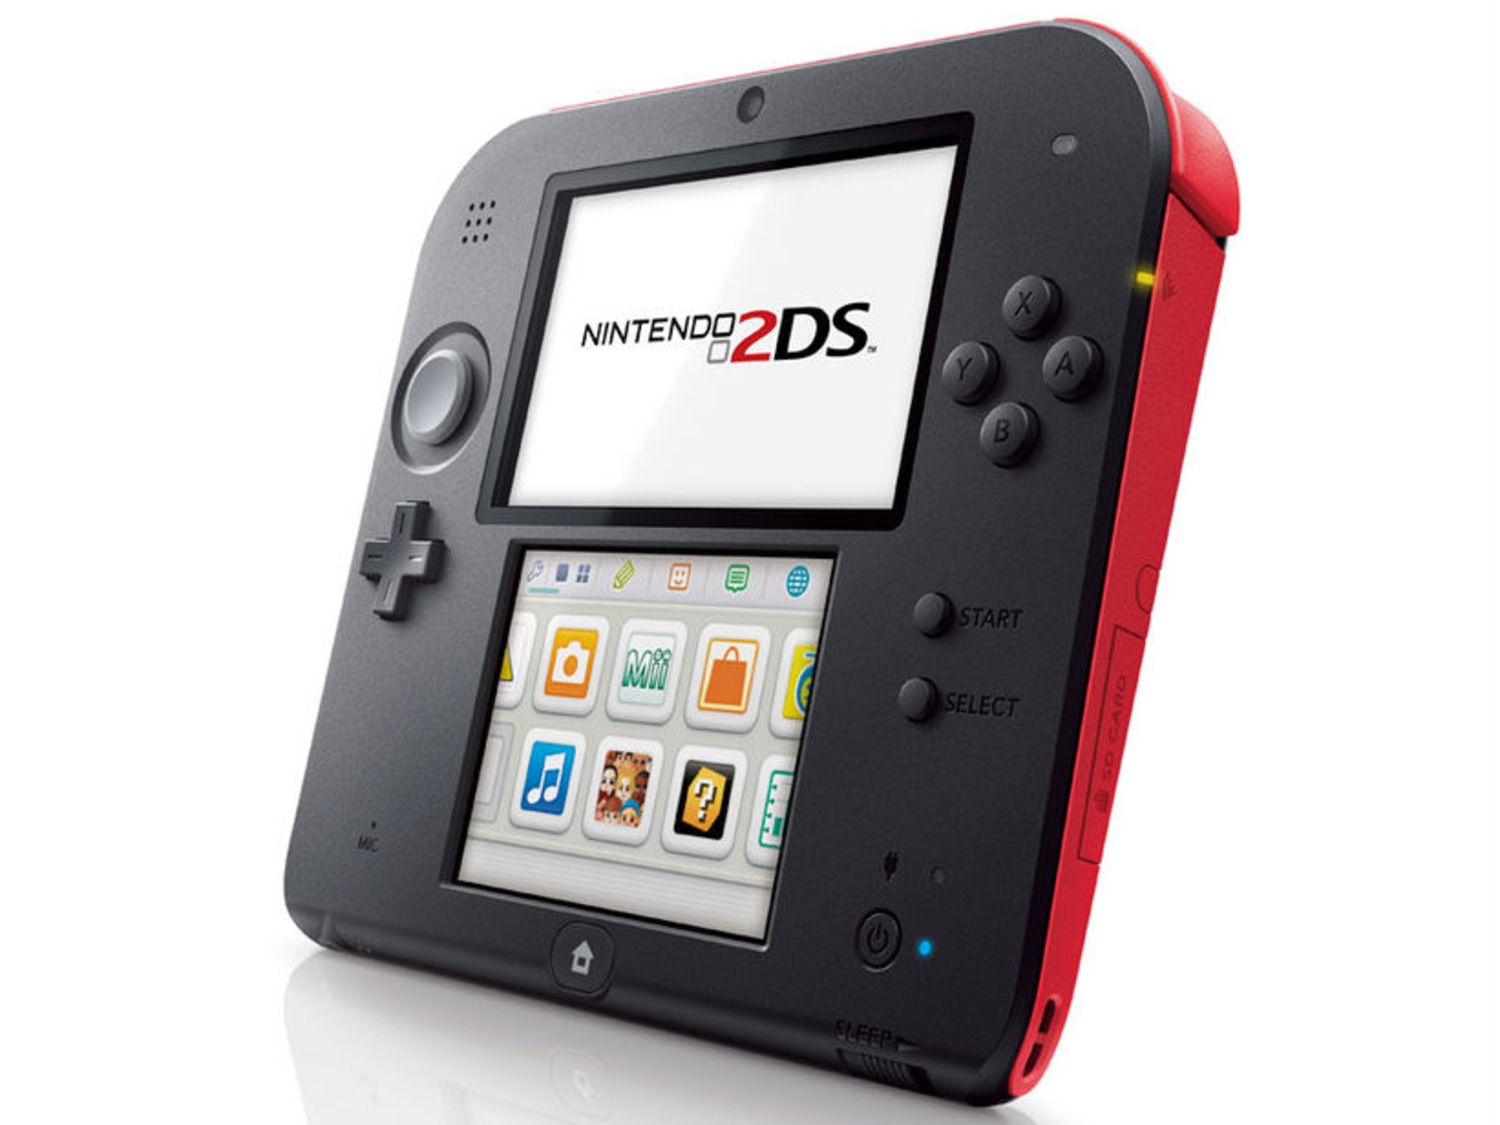 Ib forræderi lække Nintendo puts itself back in the game with 2DS and 'Pokémon X & Y'